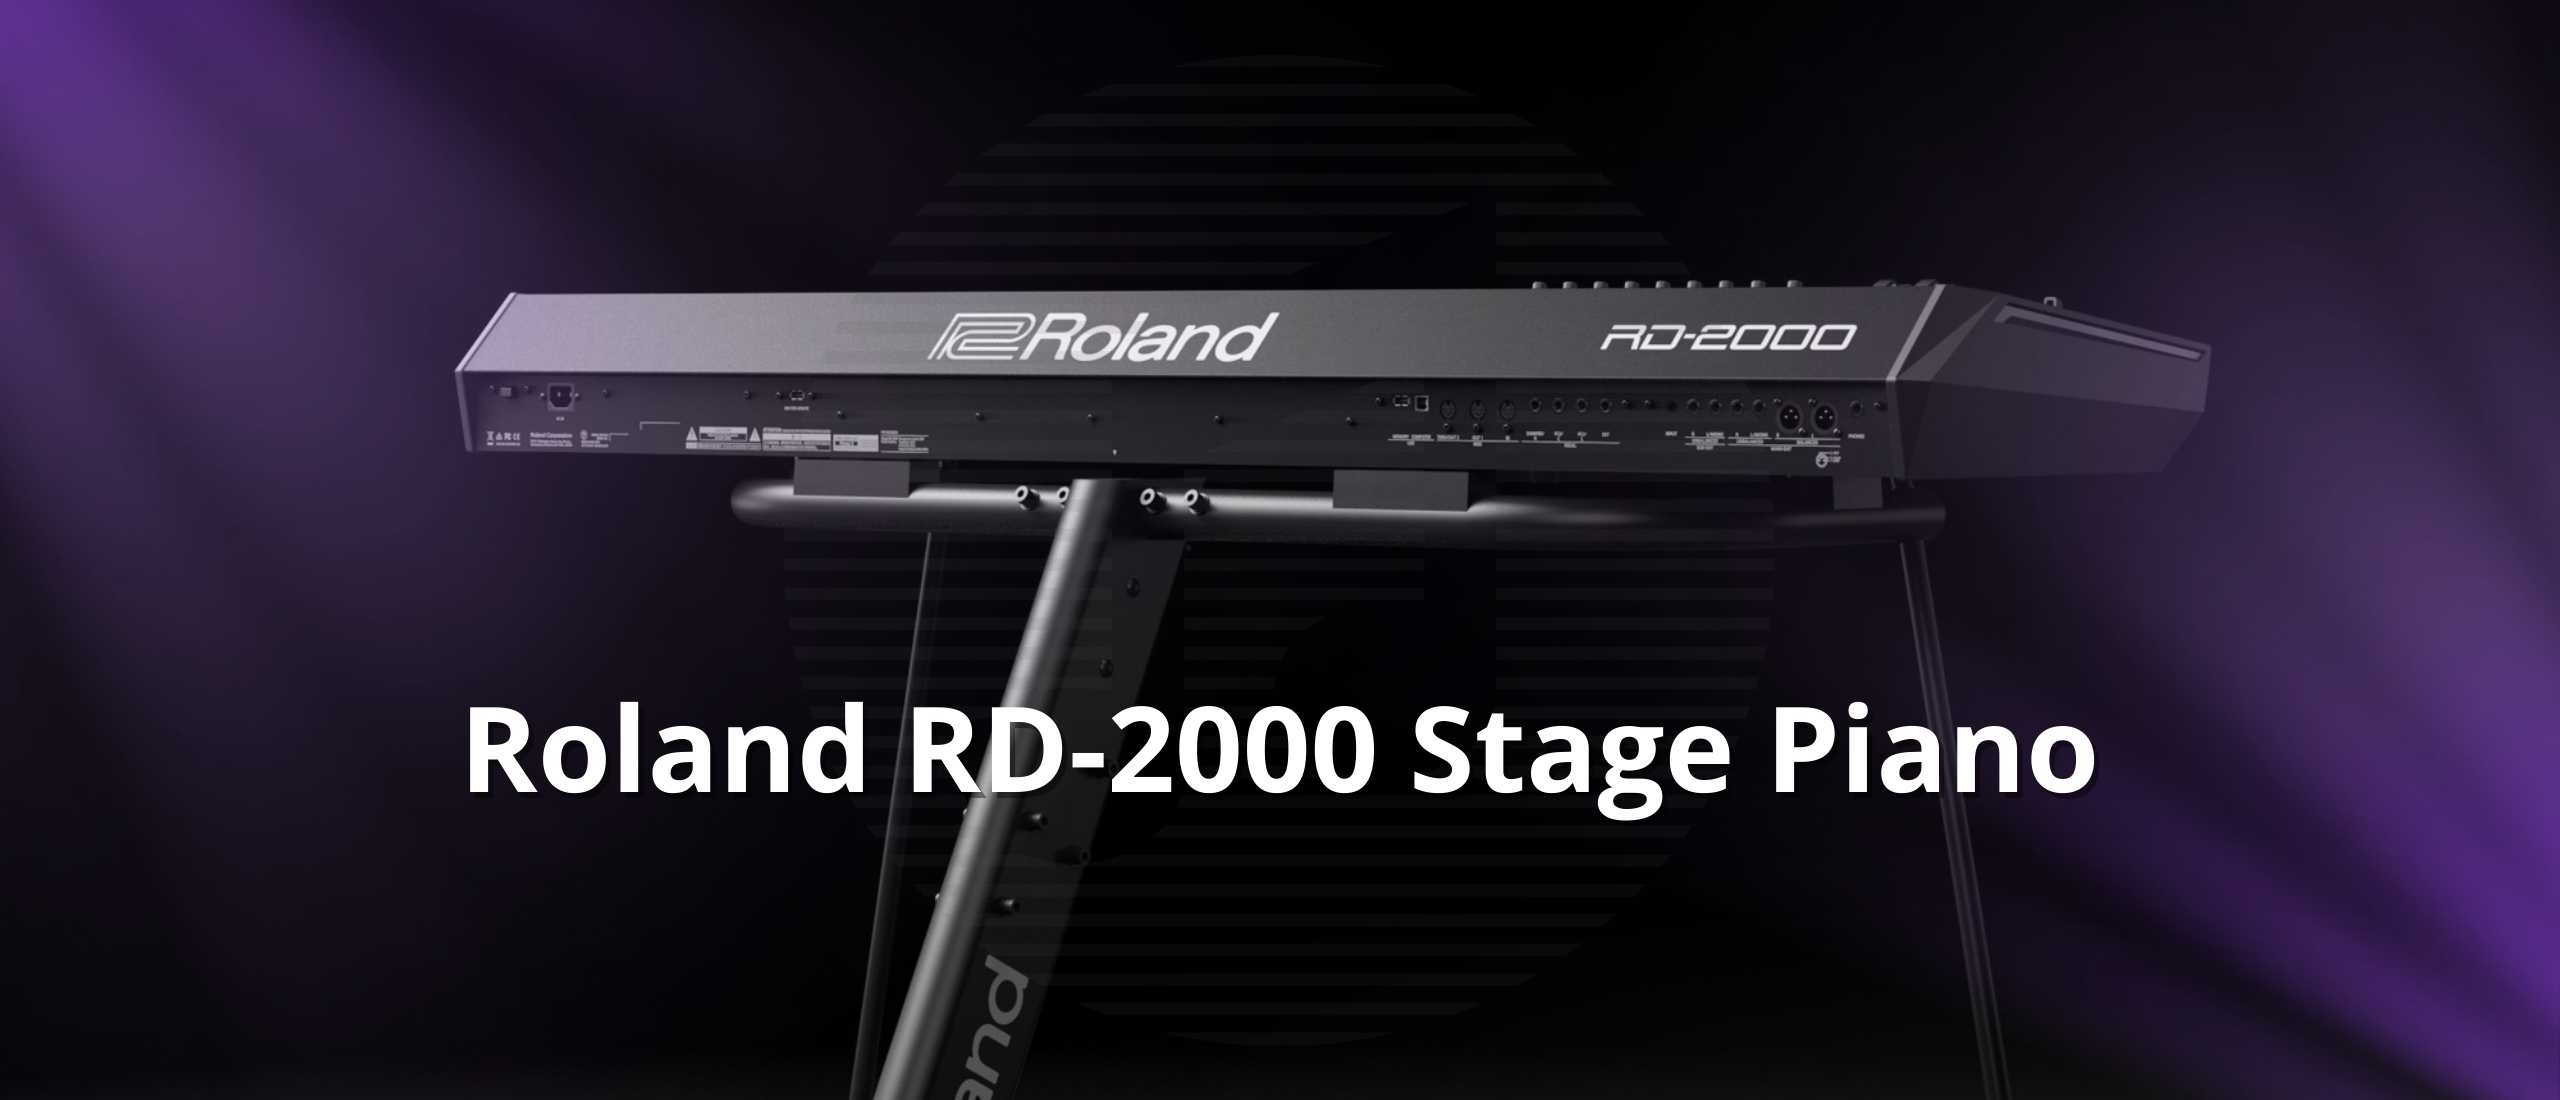 Roland RD-2000 Stage Piano Review